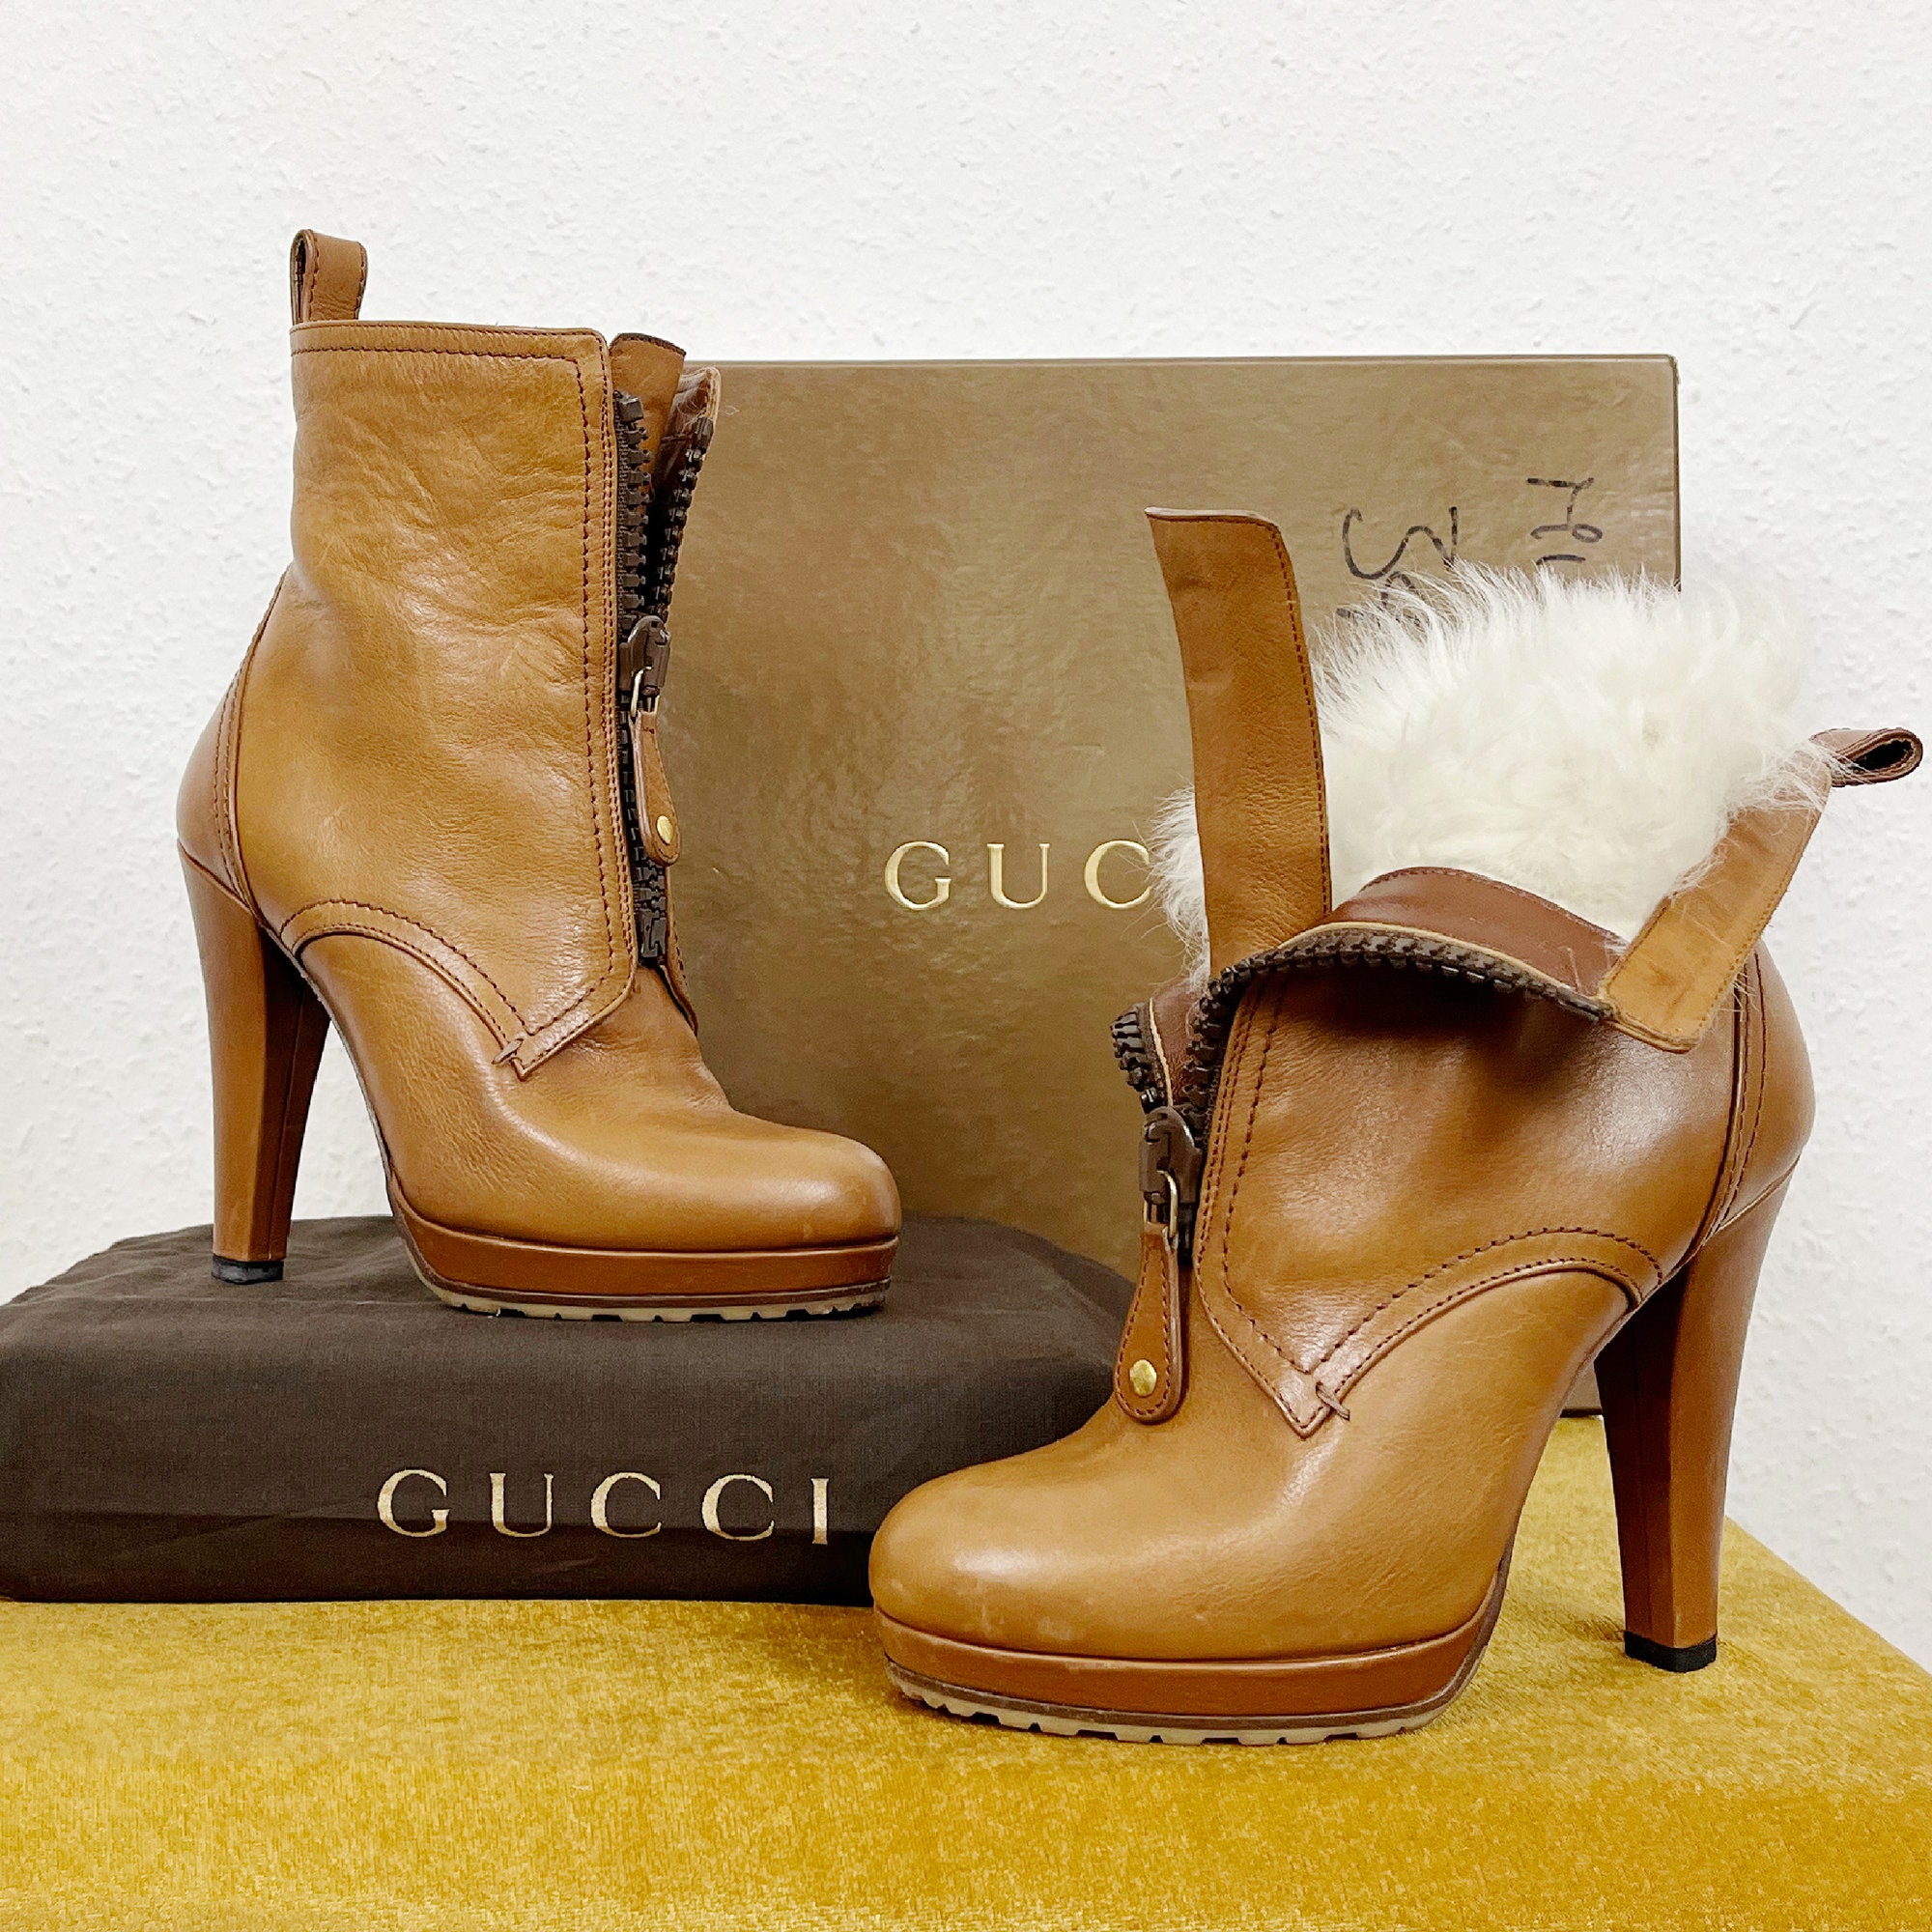 Gucci, Shoes, Nwt Gucci Kids Winter Boots